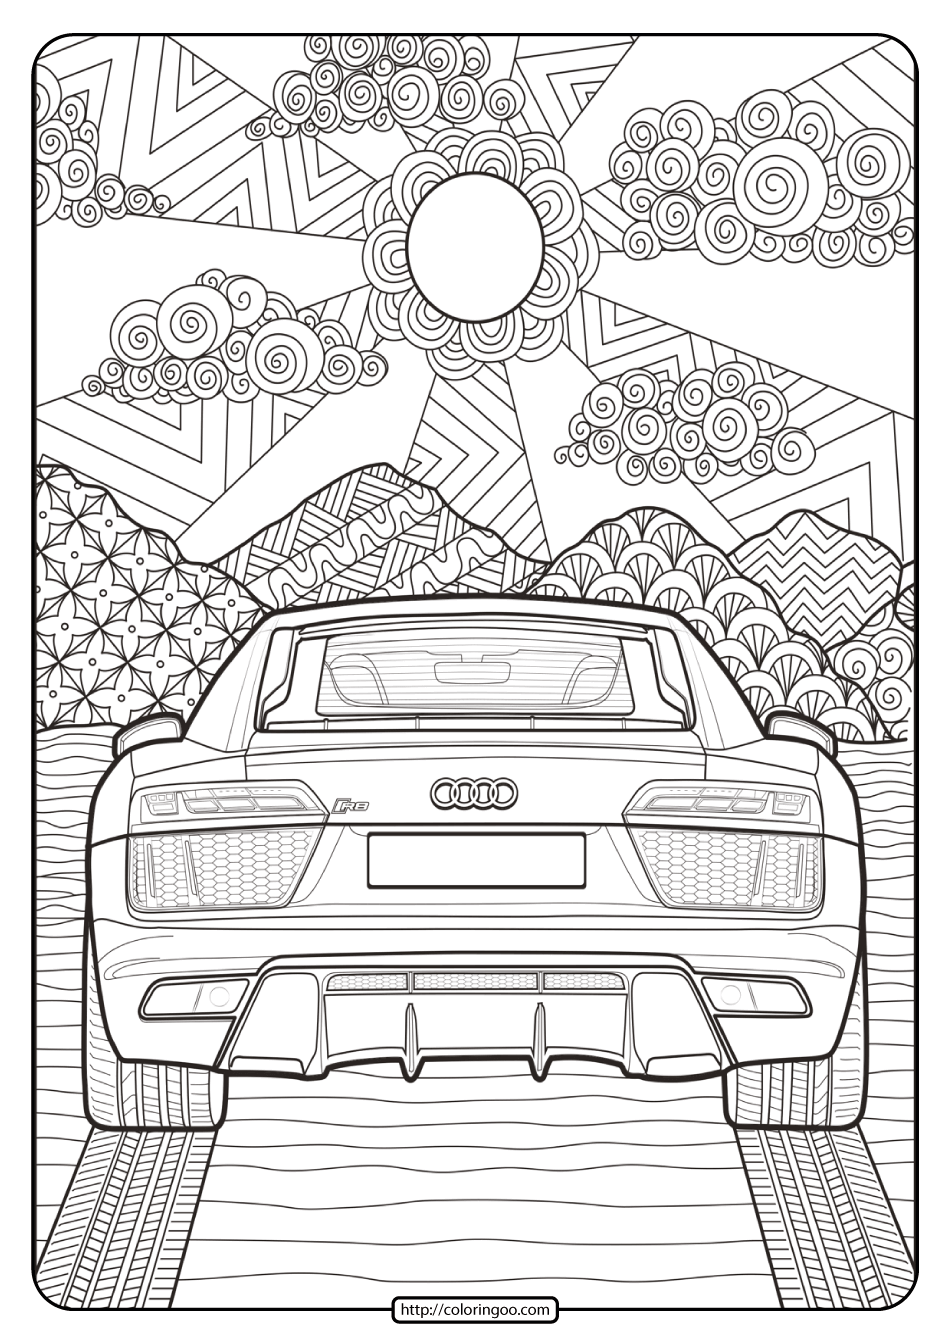 Printable Audi Cars Coloring Book & Page - 13